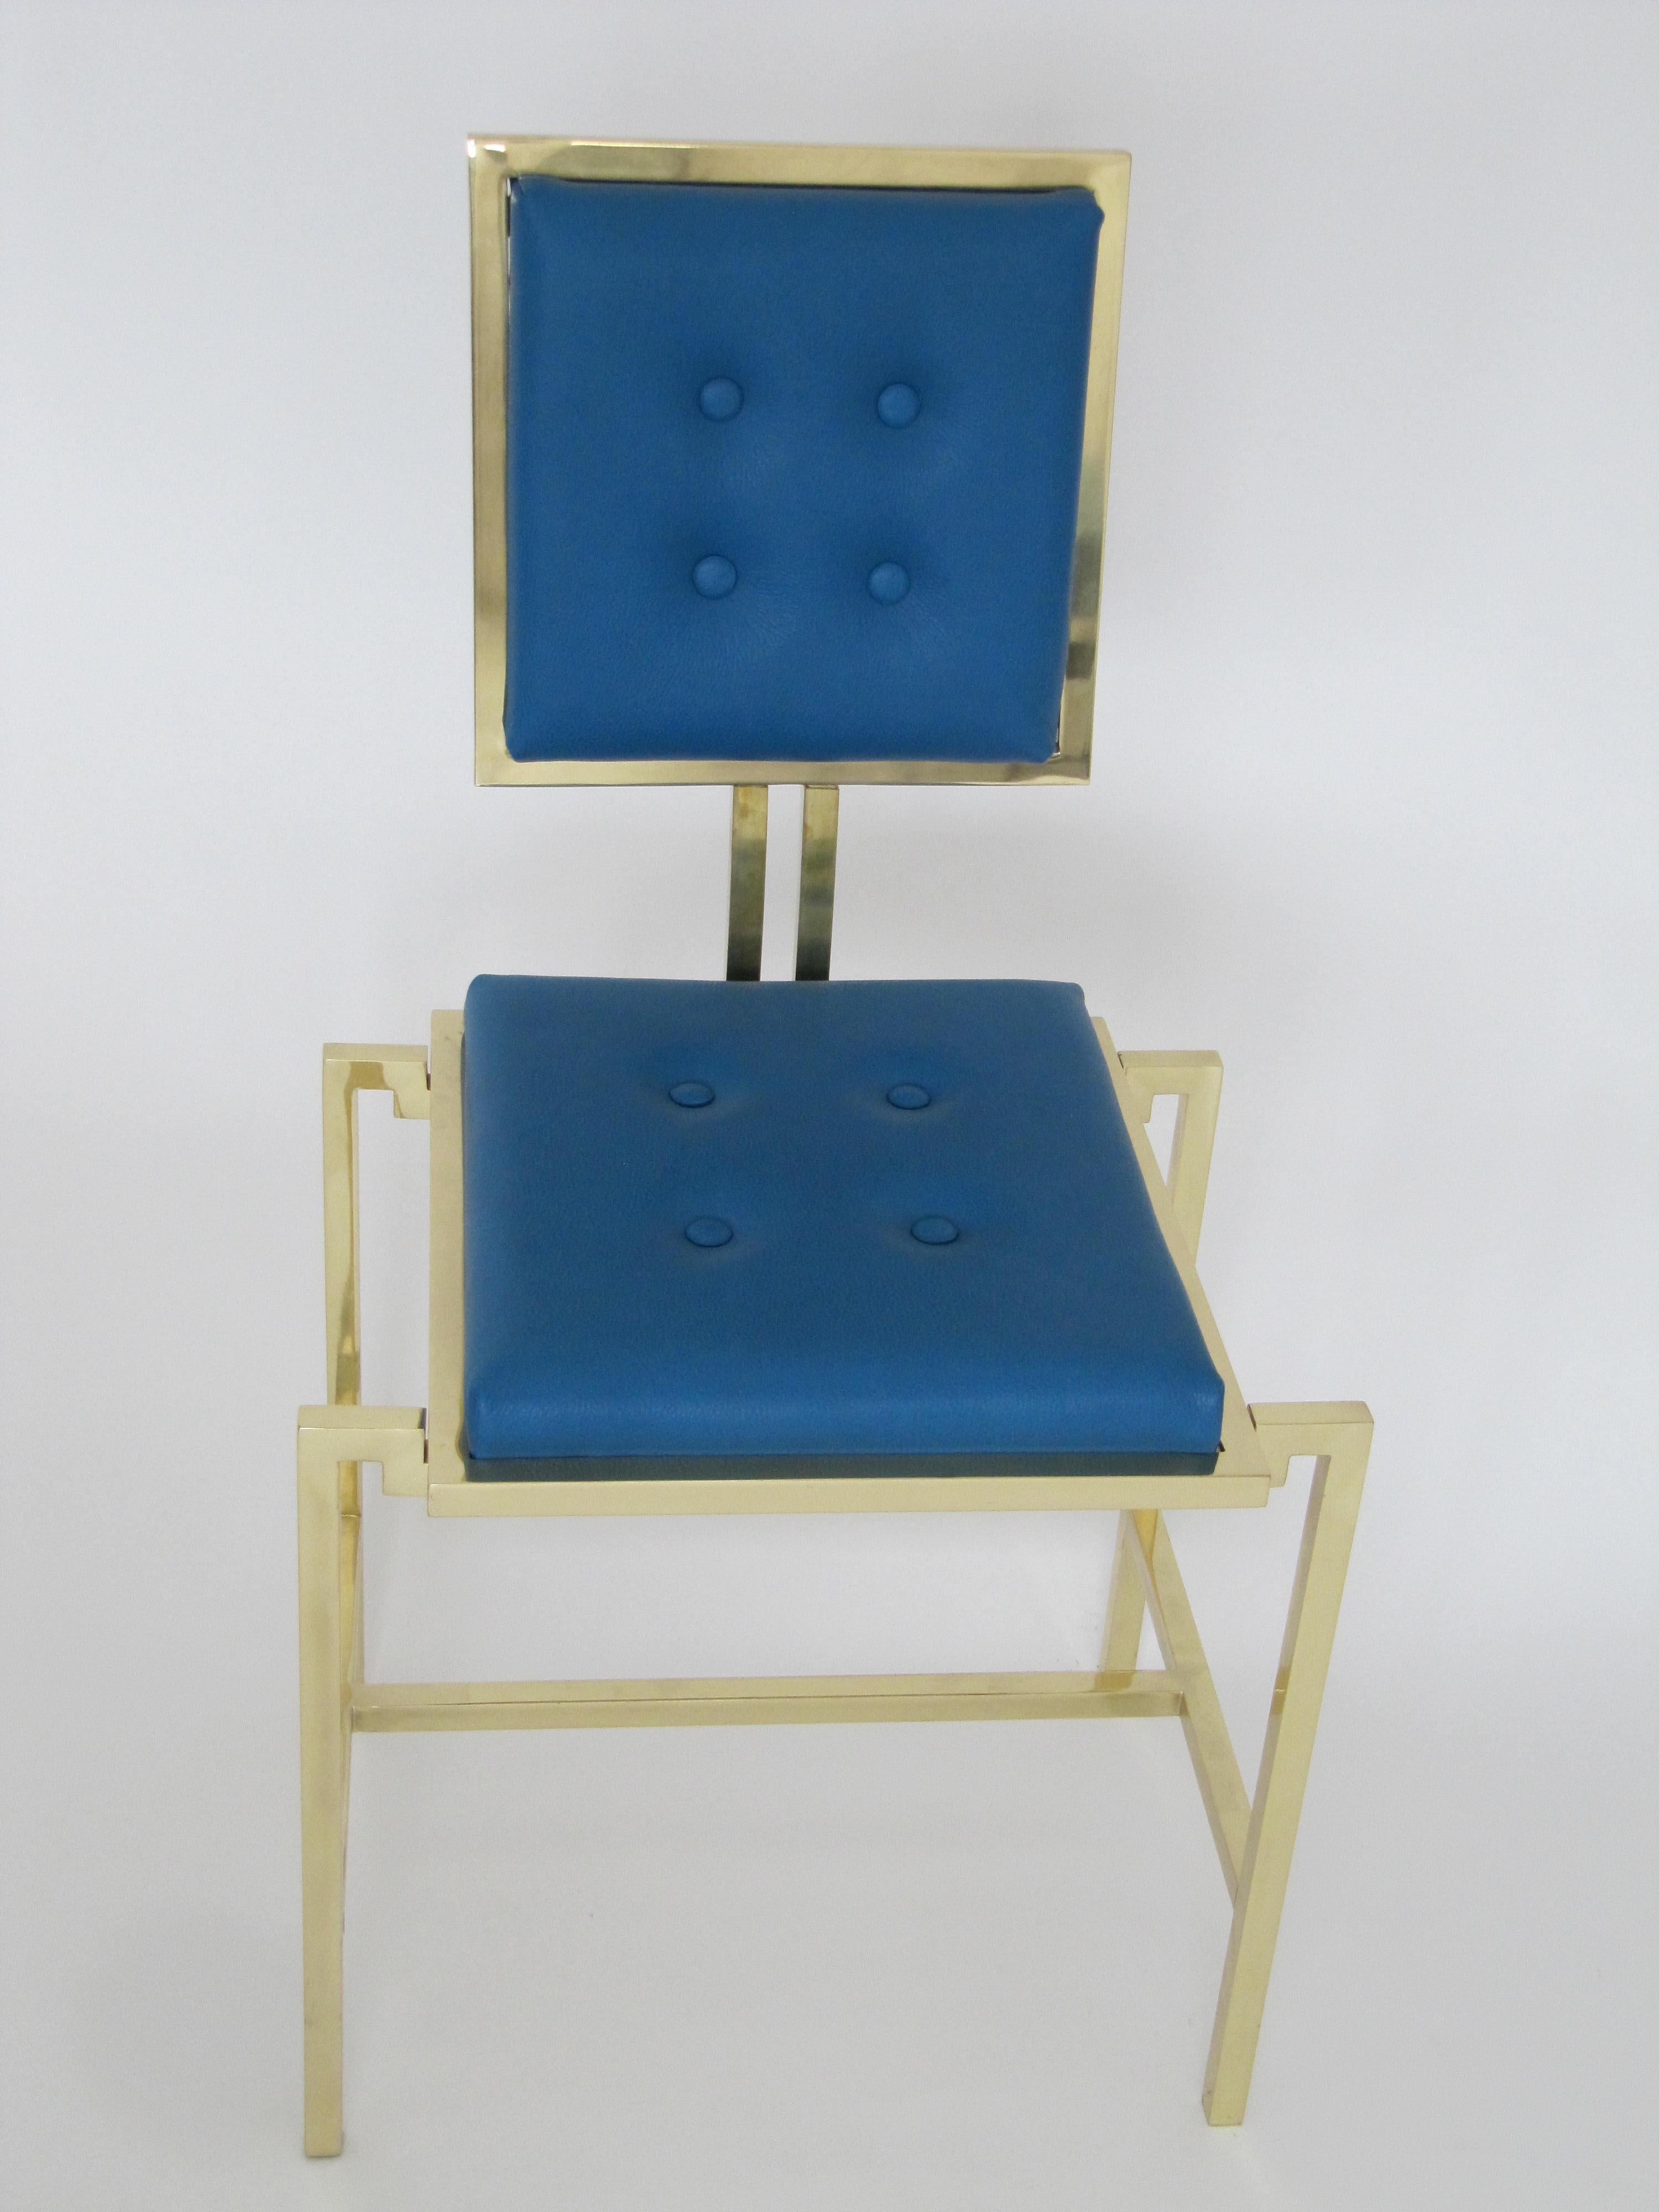 A simple yet elegant chair in authentic blue leather with solid lines framed with gold painted brass. For sophisticated or simple contemporary setting. 

Measures 45 cm x 45 cm x H 100.